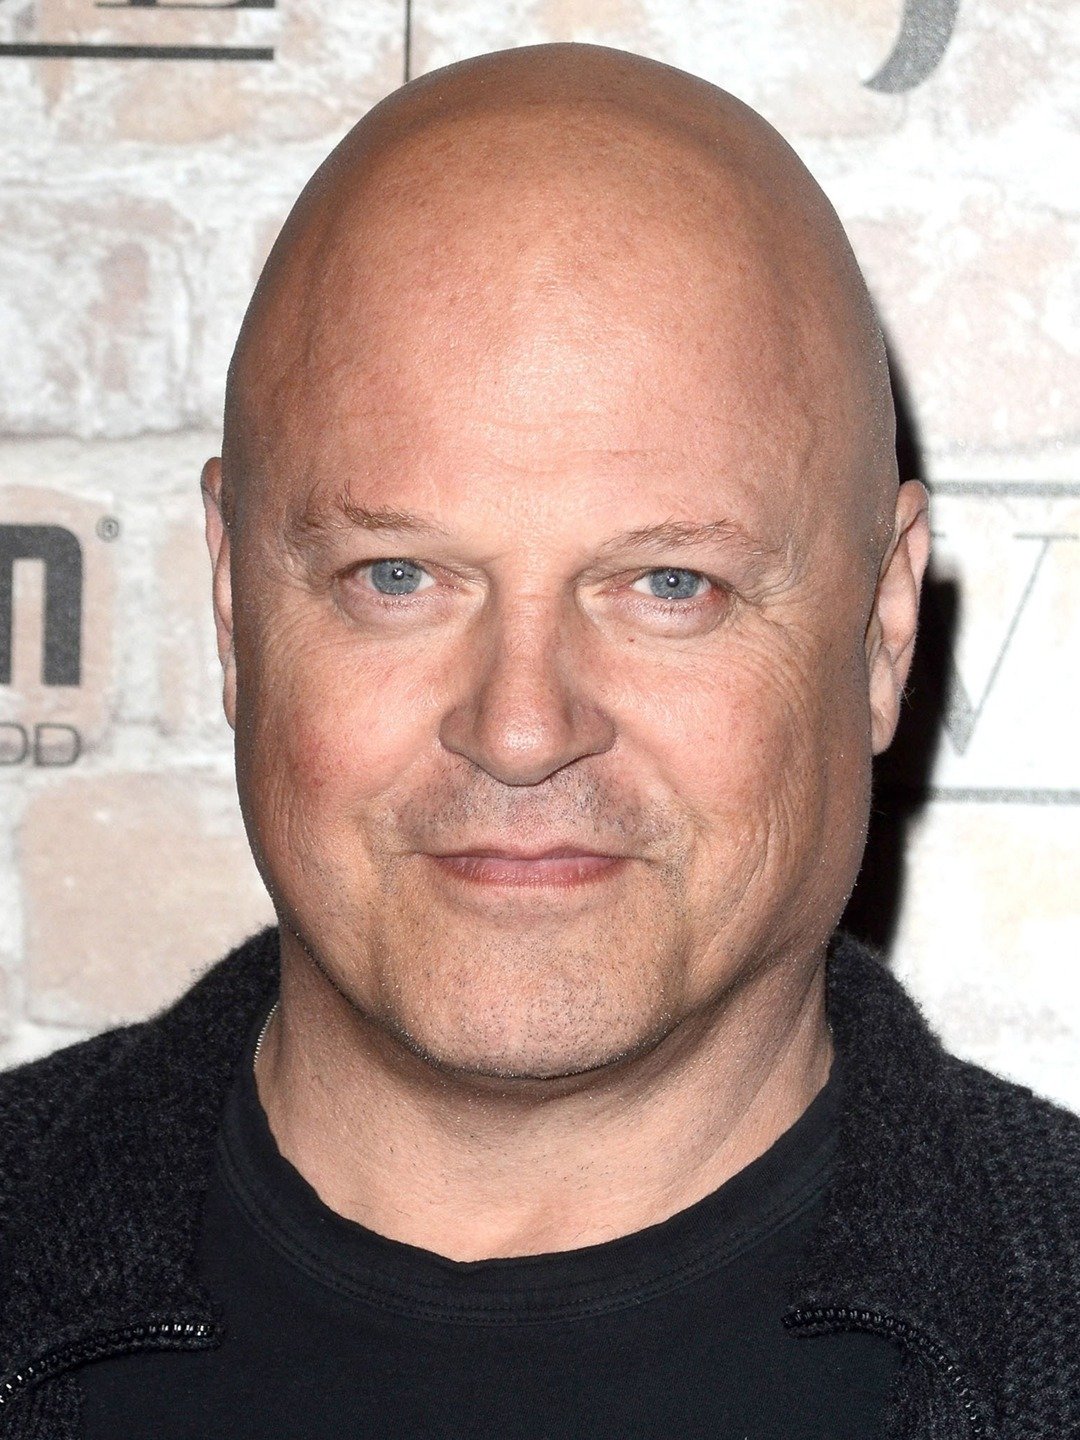 How tall is Michael Chiklis?